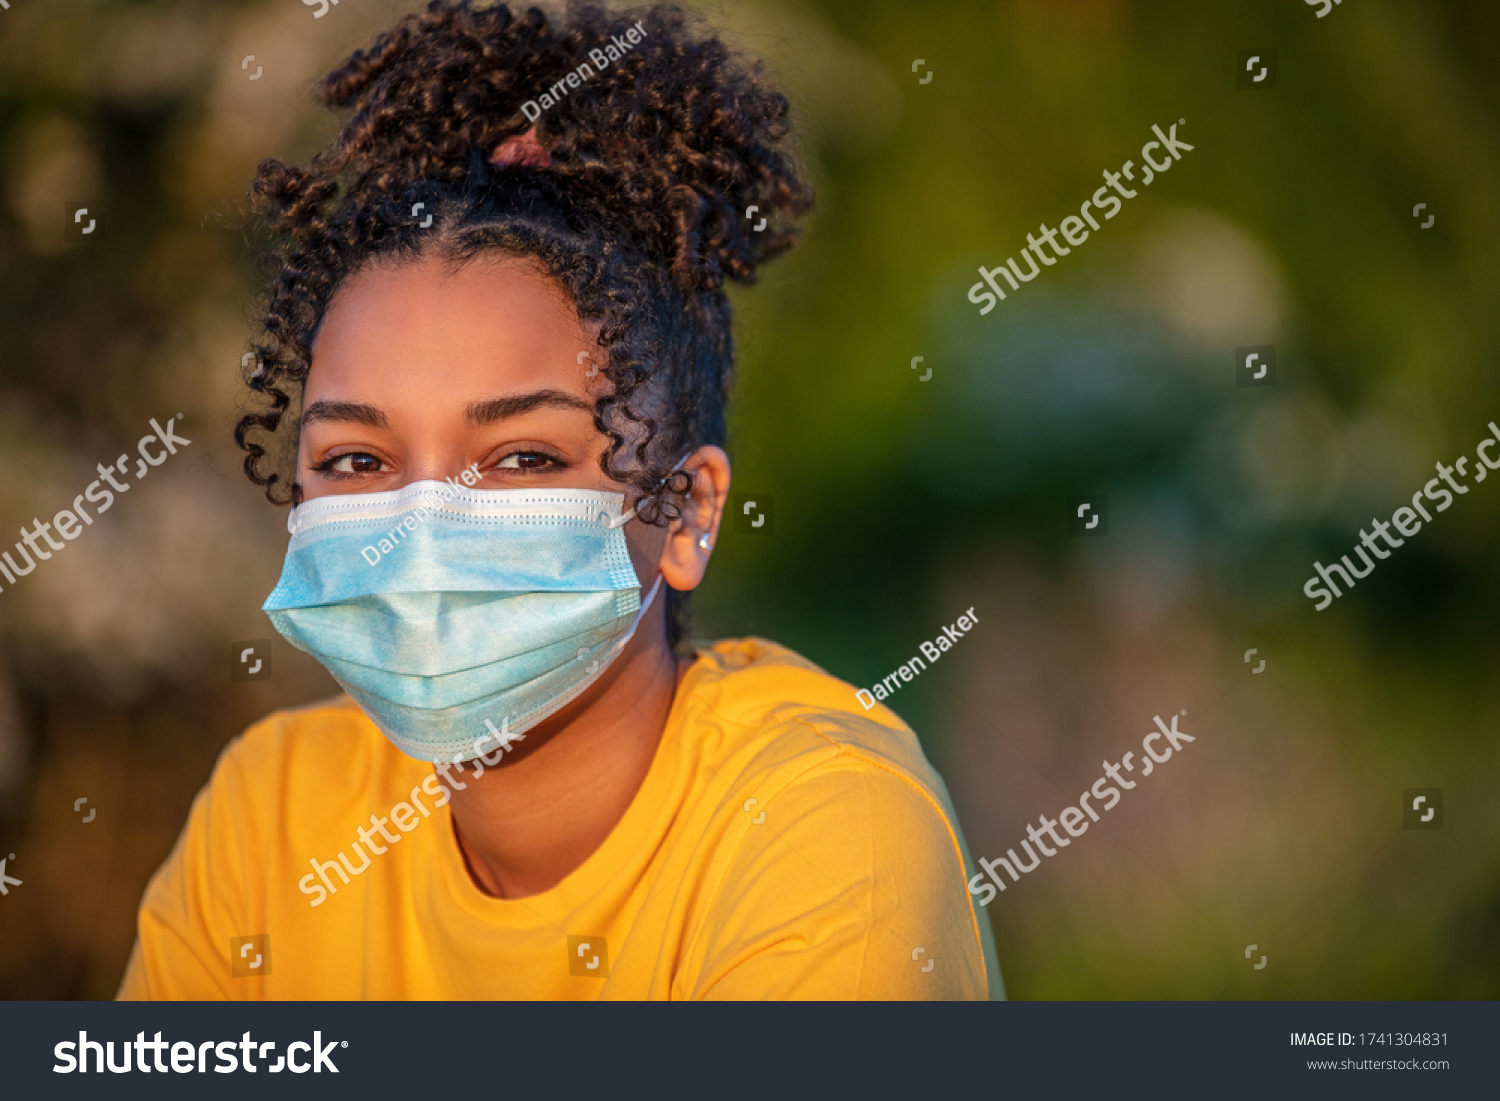 Mixed race African American teenager teen girl young woman wearing a face mask outside during the Coronavirus COVID-19 virus pandemic #1741304831